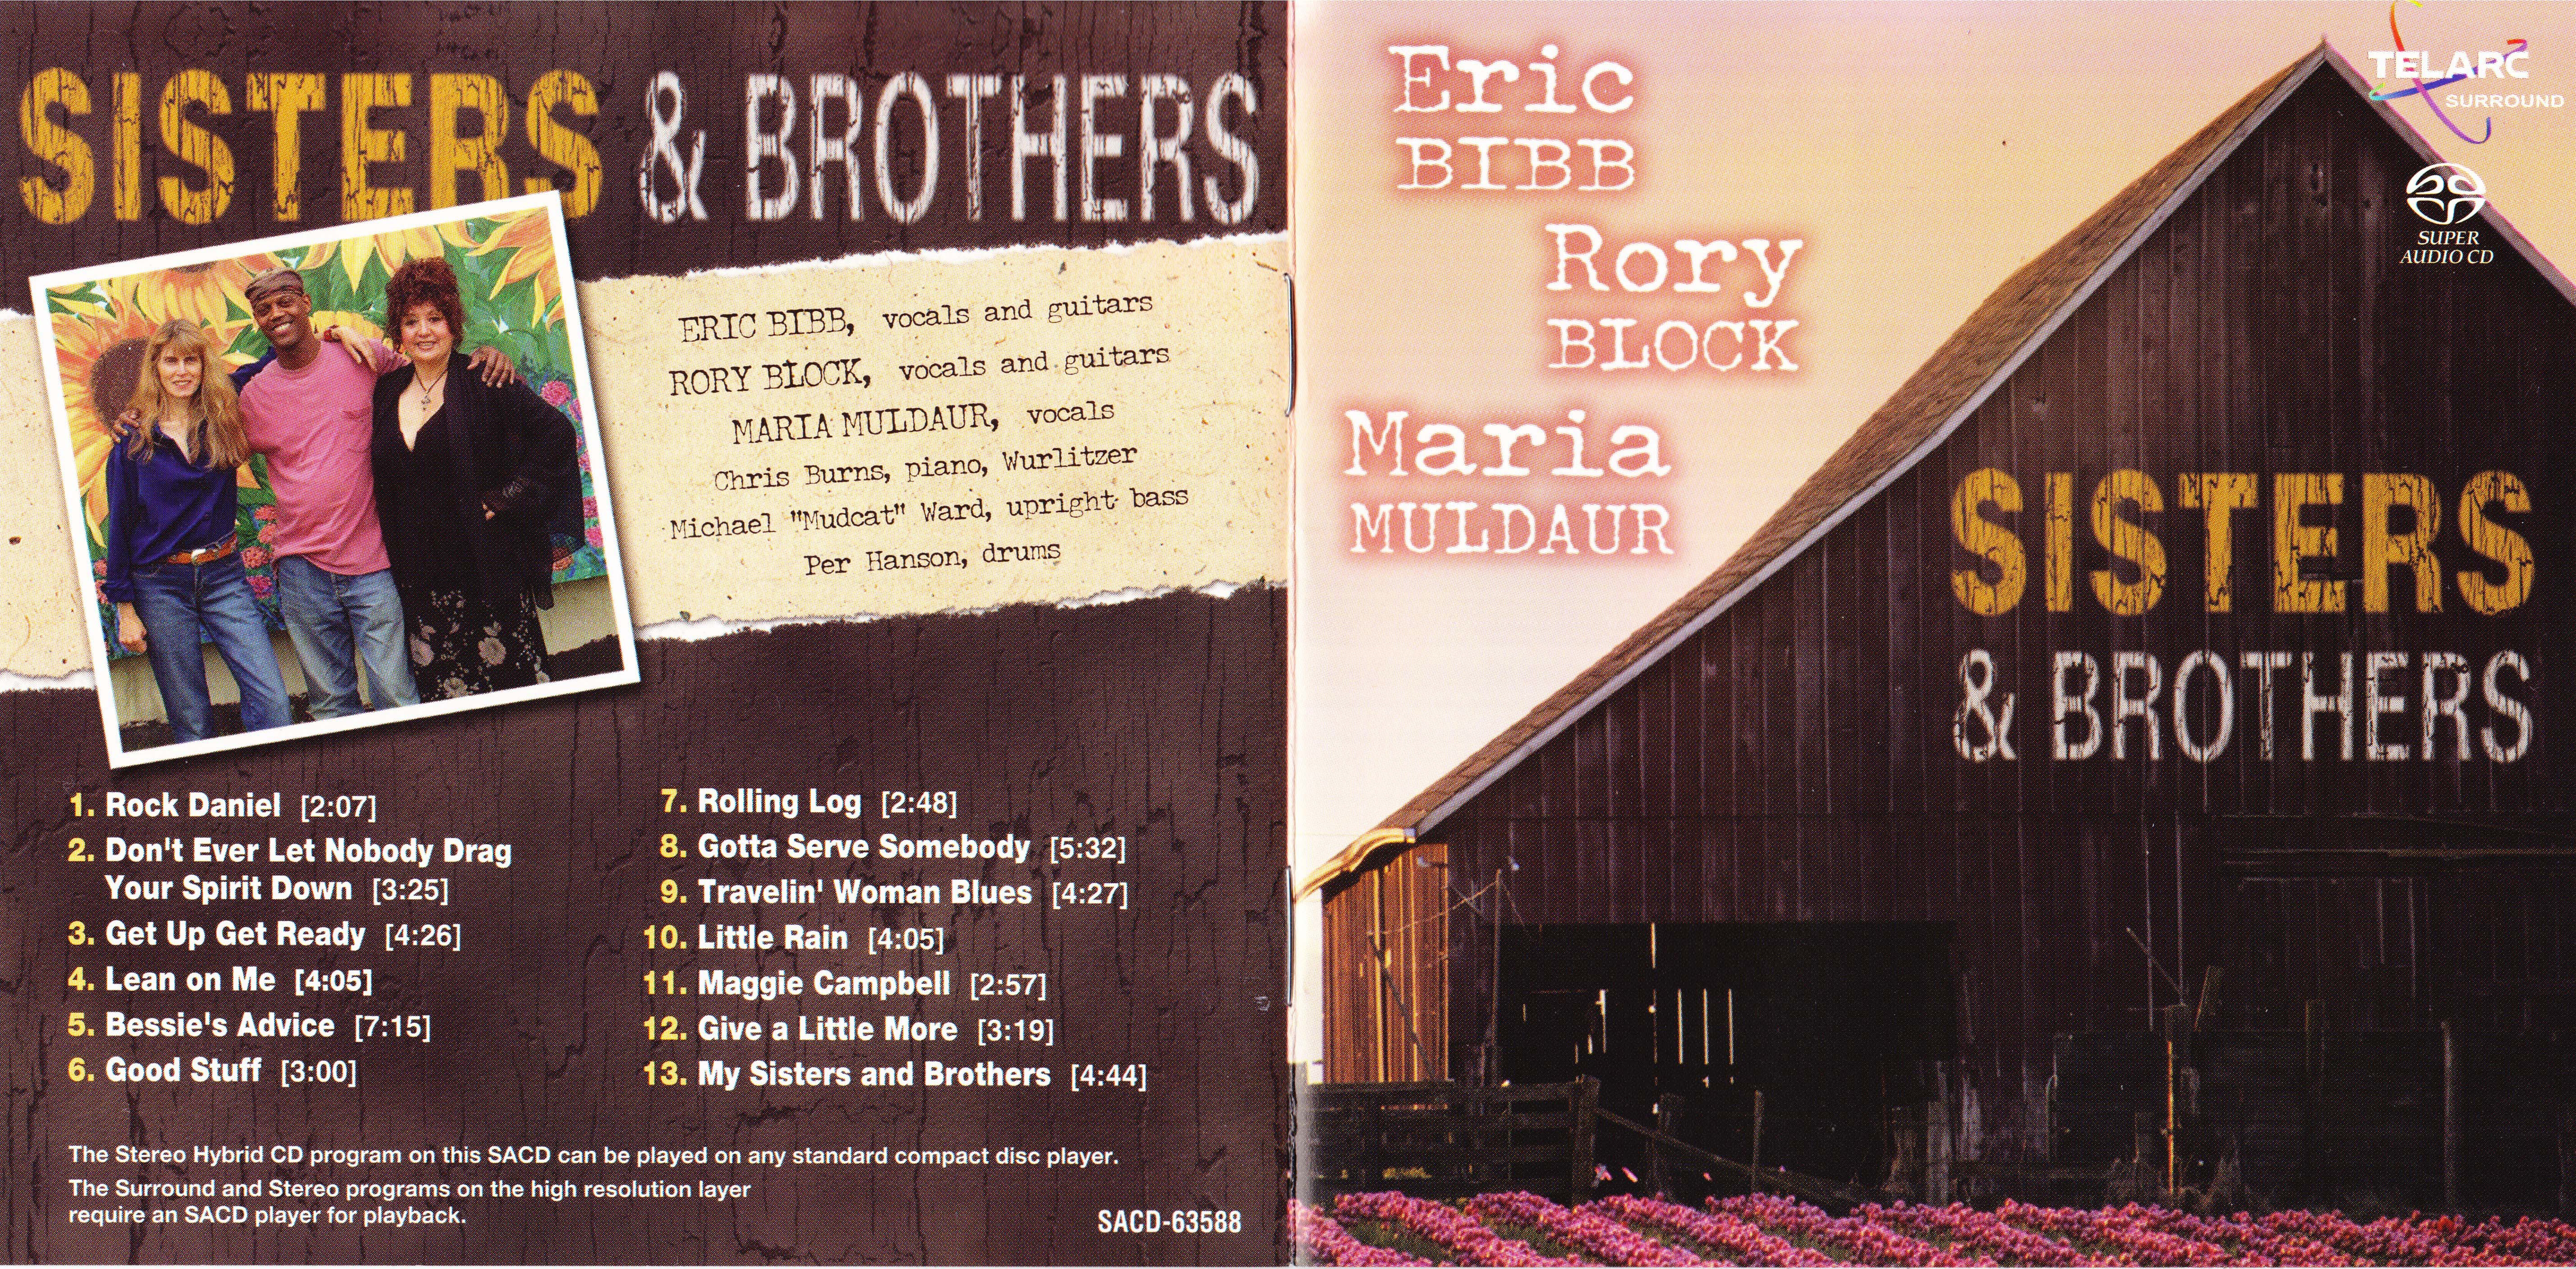 N brothers. Brothers'n'sisters. Brothers and sisters группа музыкальная. Rory Block. Eric Bibb feat Rory Block, Maria Muldaur - Bessie's advice.